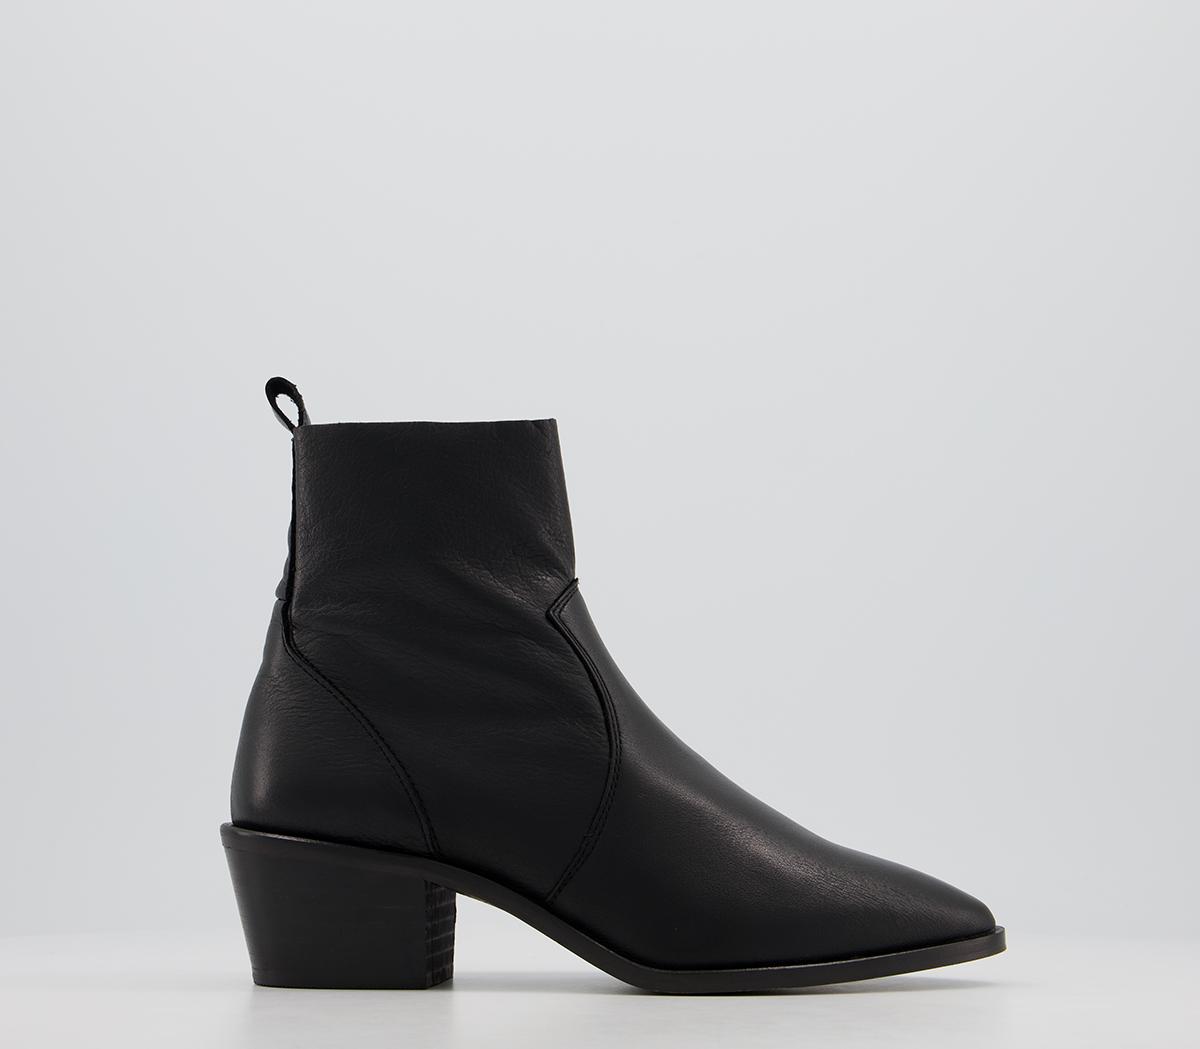 OFFICEAsher Casual Unlined BootsBlack Leather